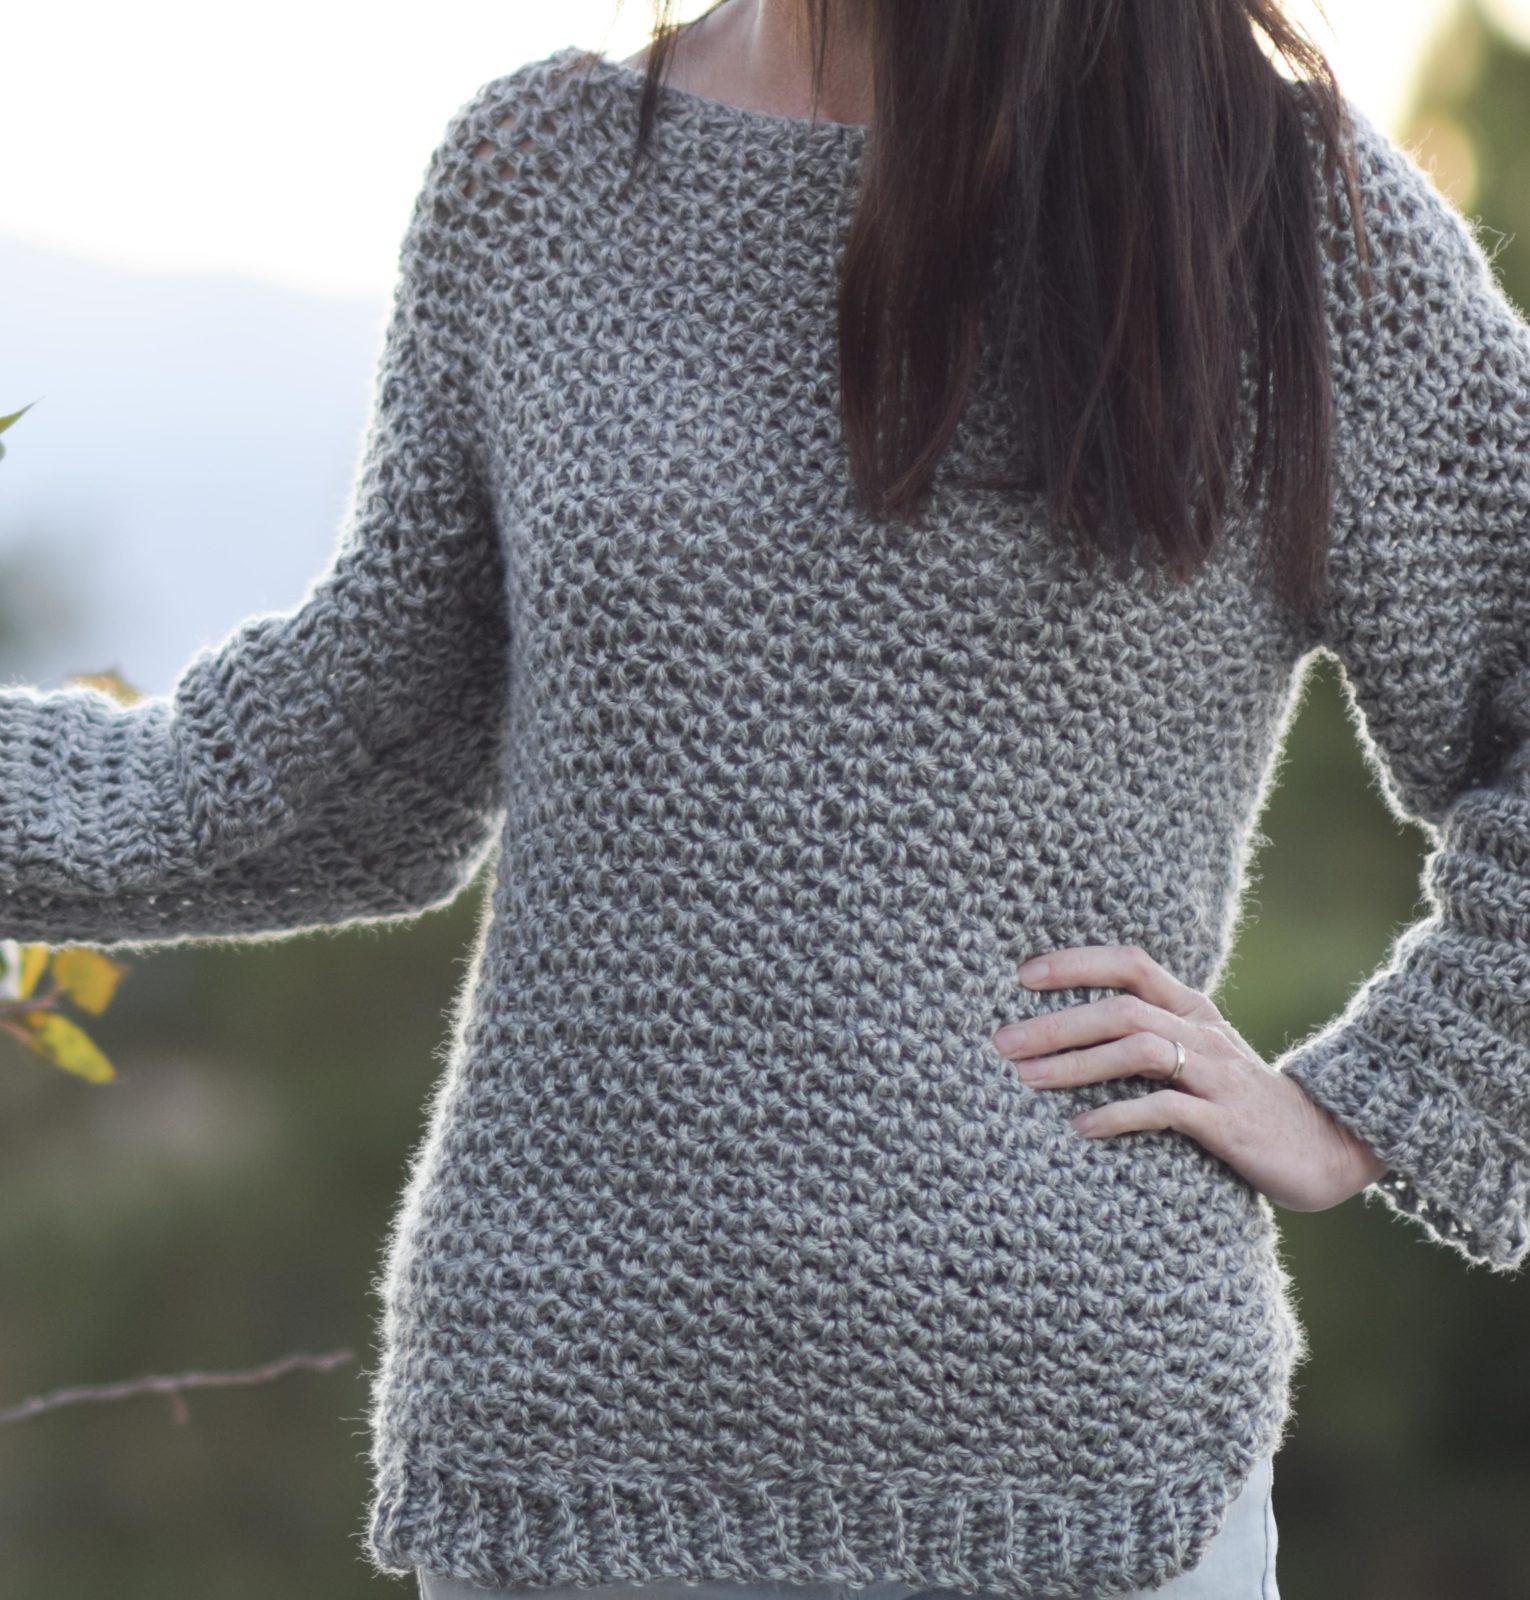 How To Make An Easy Crocheted Sweater Knit Like Mama In